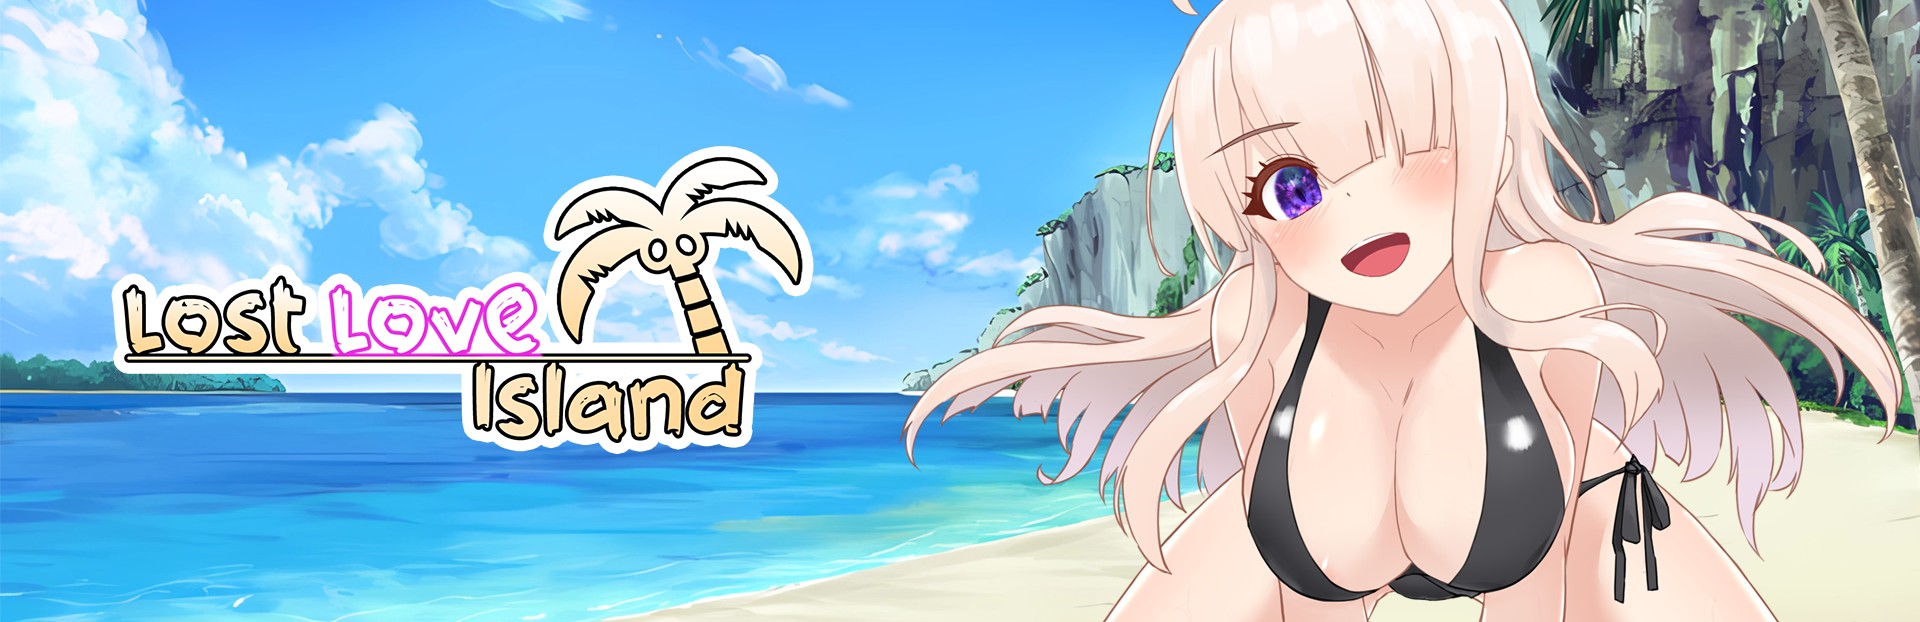 Lost Love Island Adult Game Android Apk Download (1)